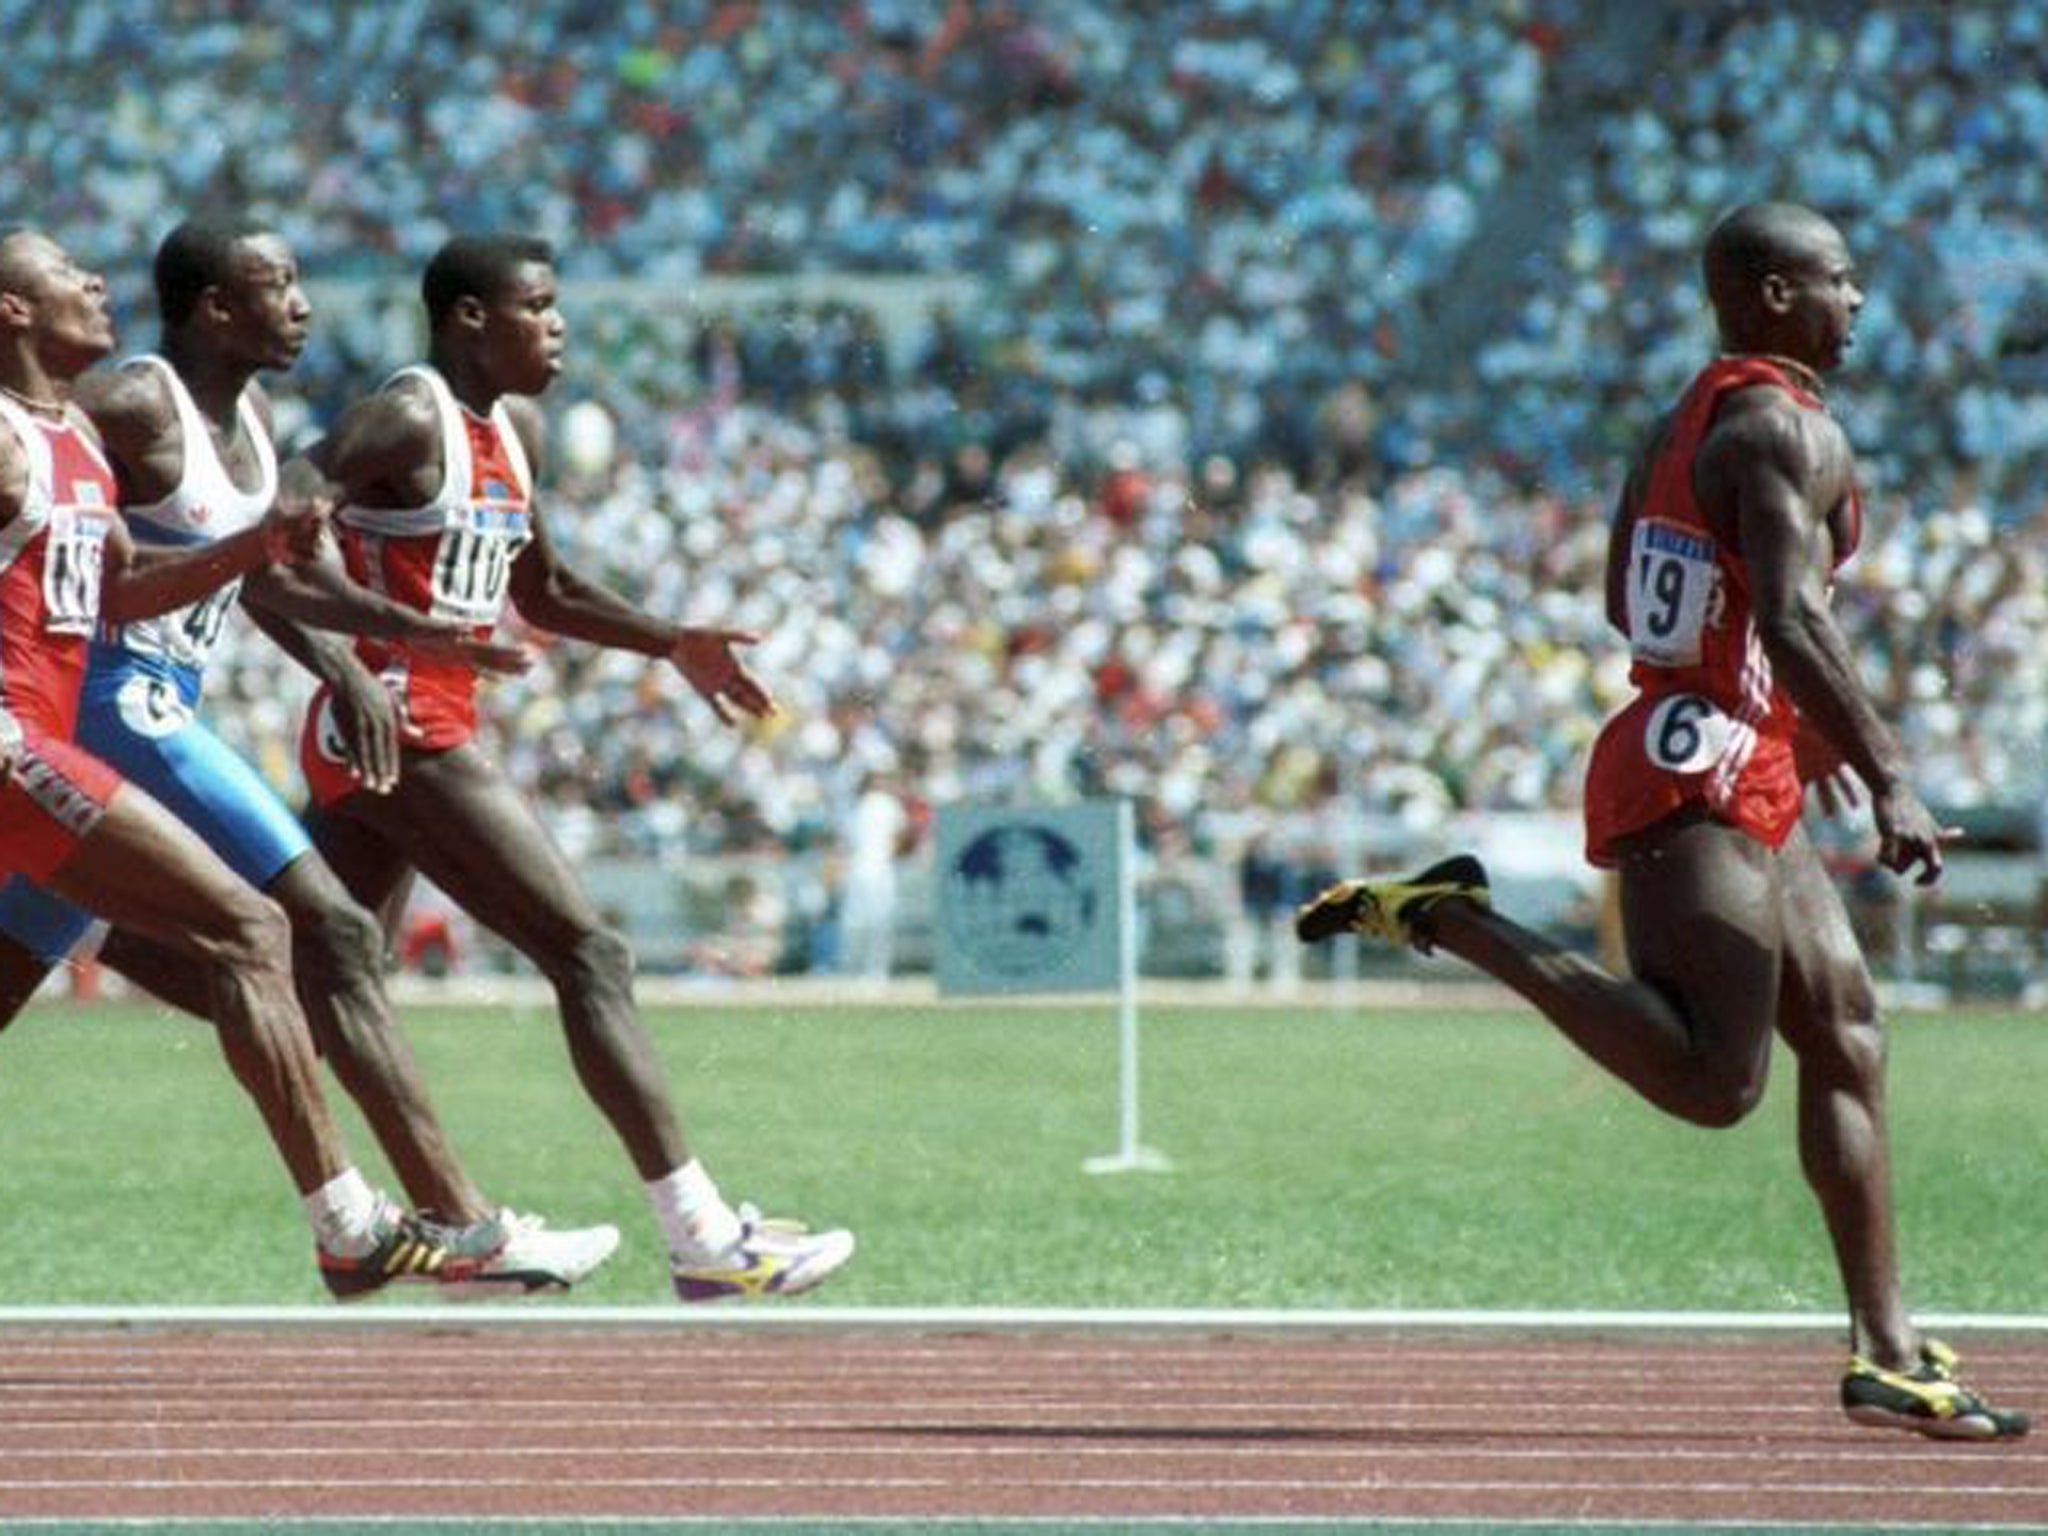 Sprinter Ben Johnson winning gold in the infamous ‘dirtiest race in history’, the 1988 Olympic 100m final in Seoul